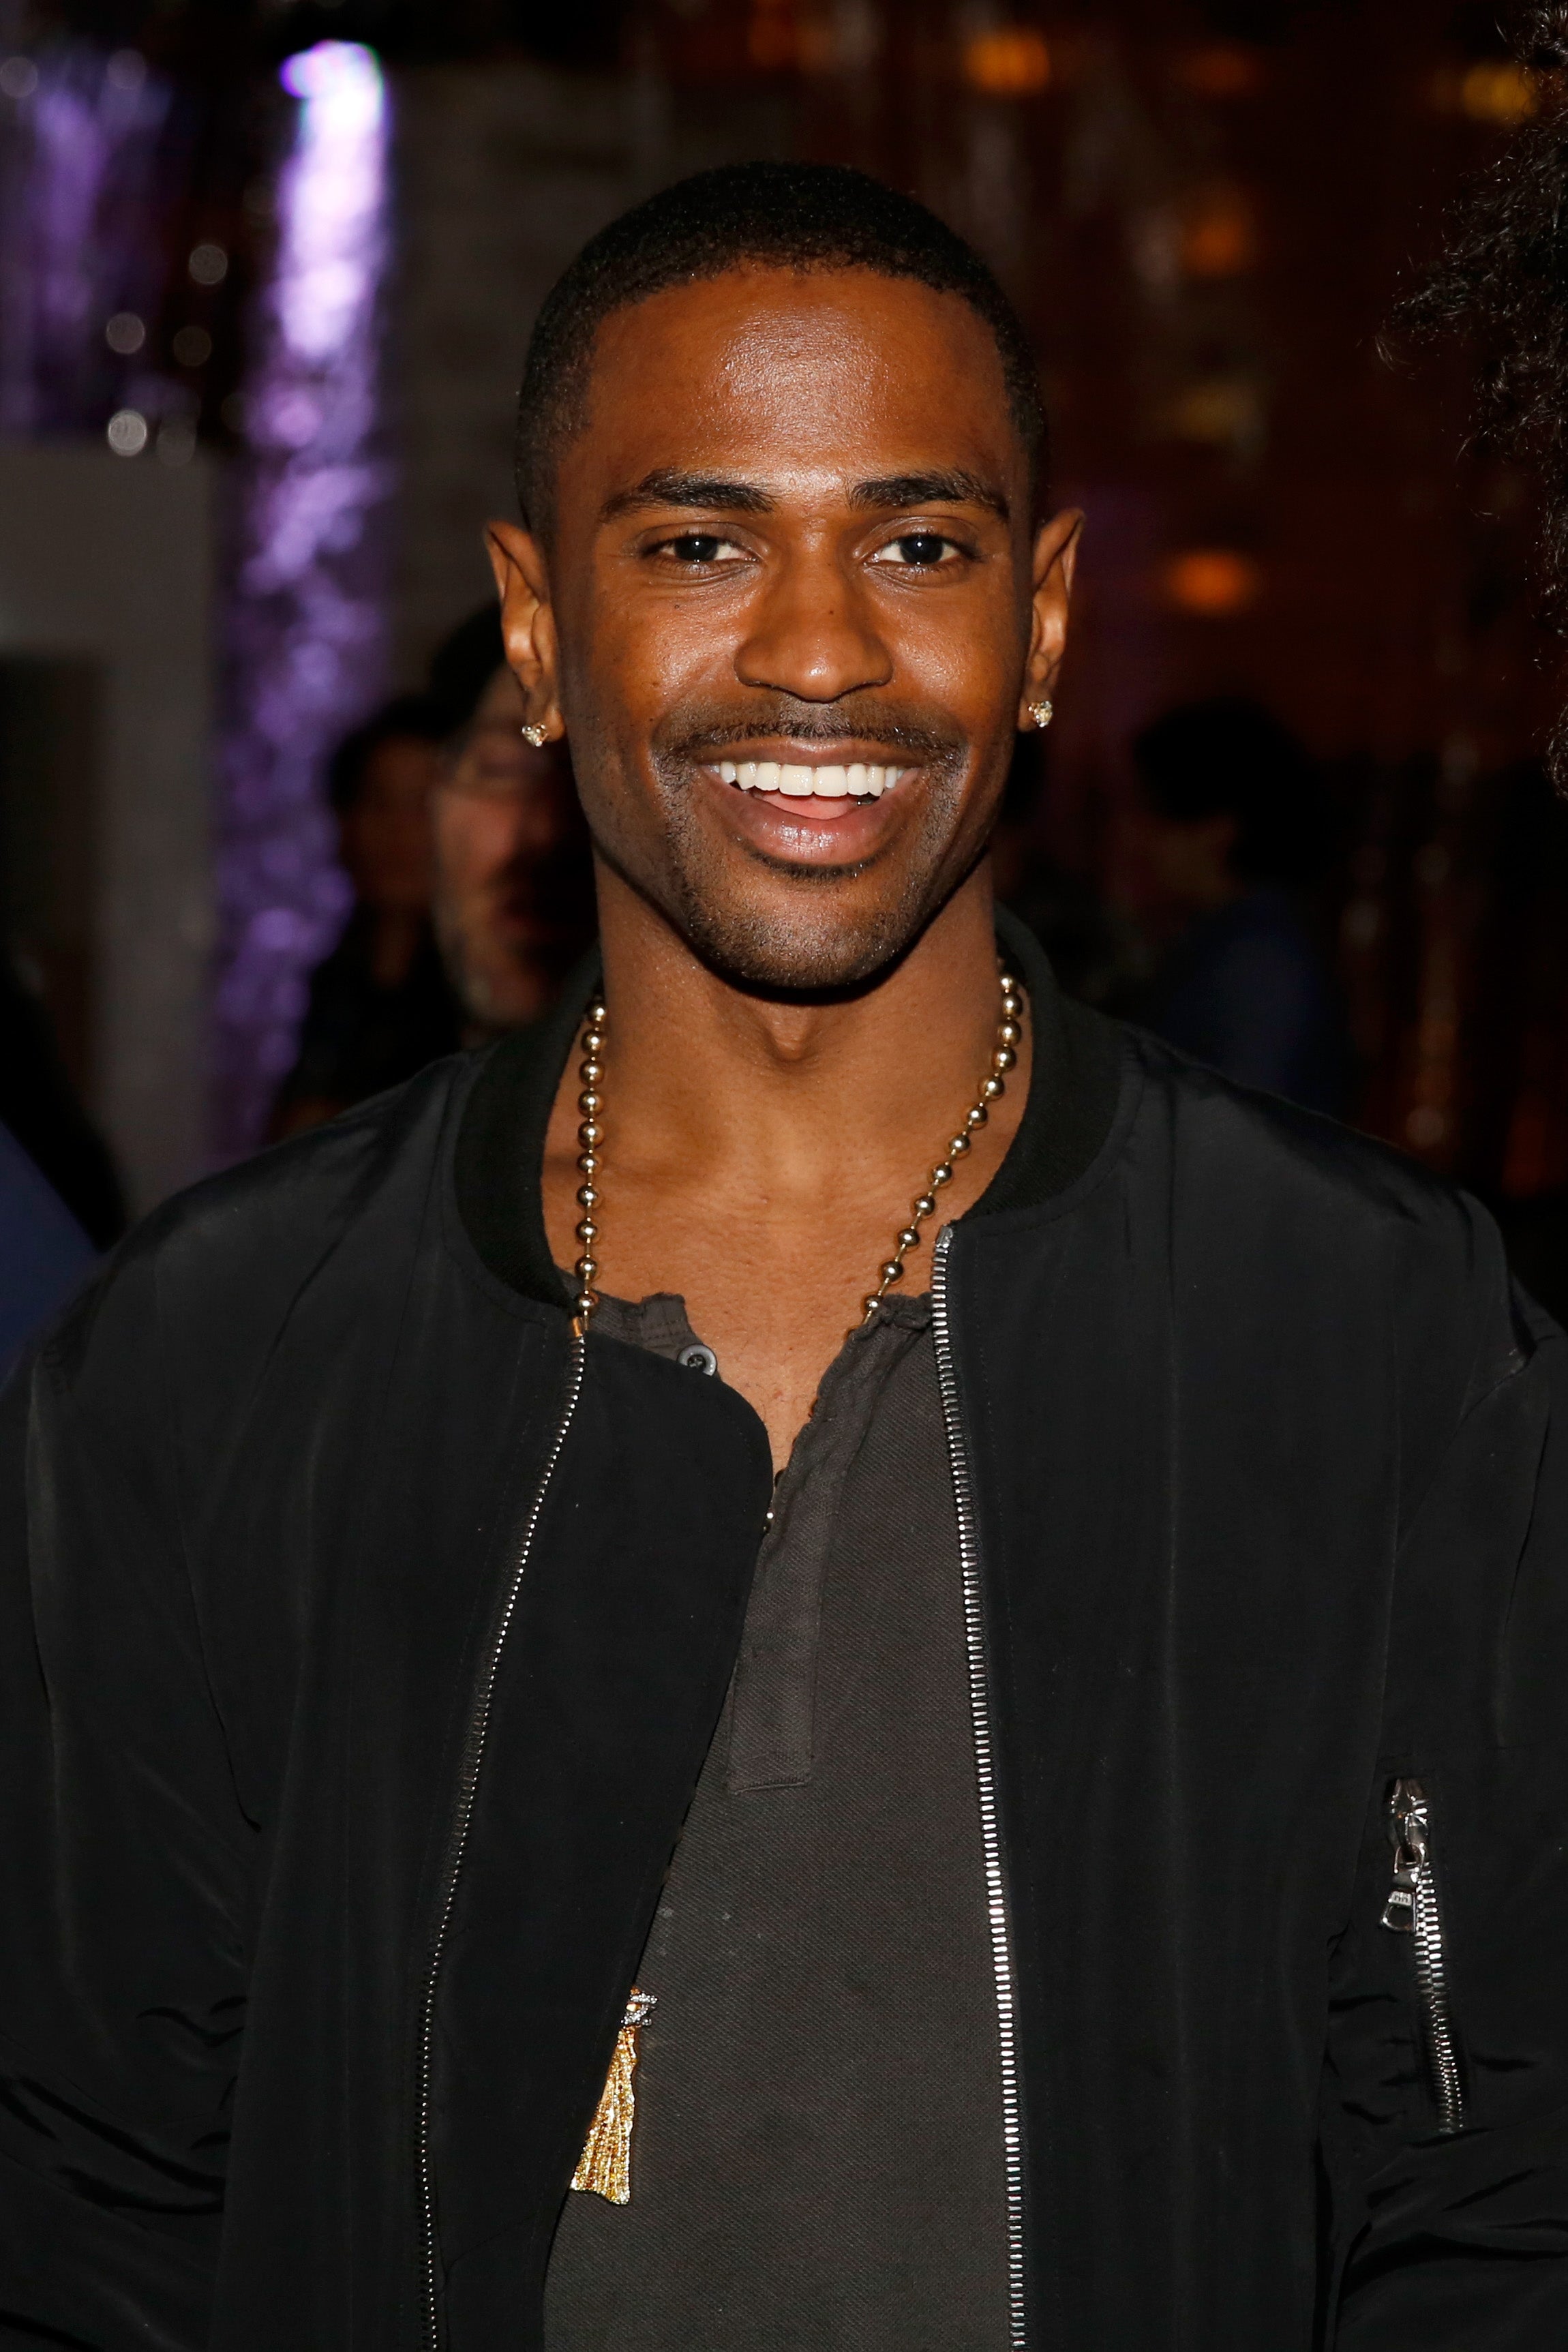 Big Sean Opens Up About Battling Anxiety: 'The One Thing I Was Missing Was Clarity'